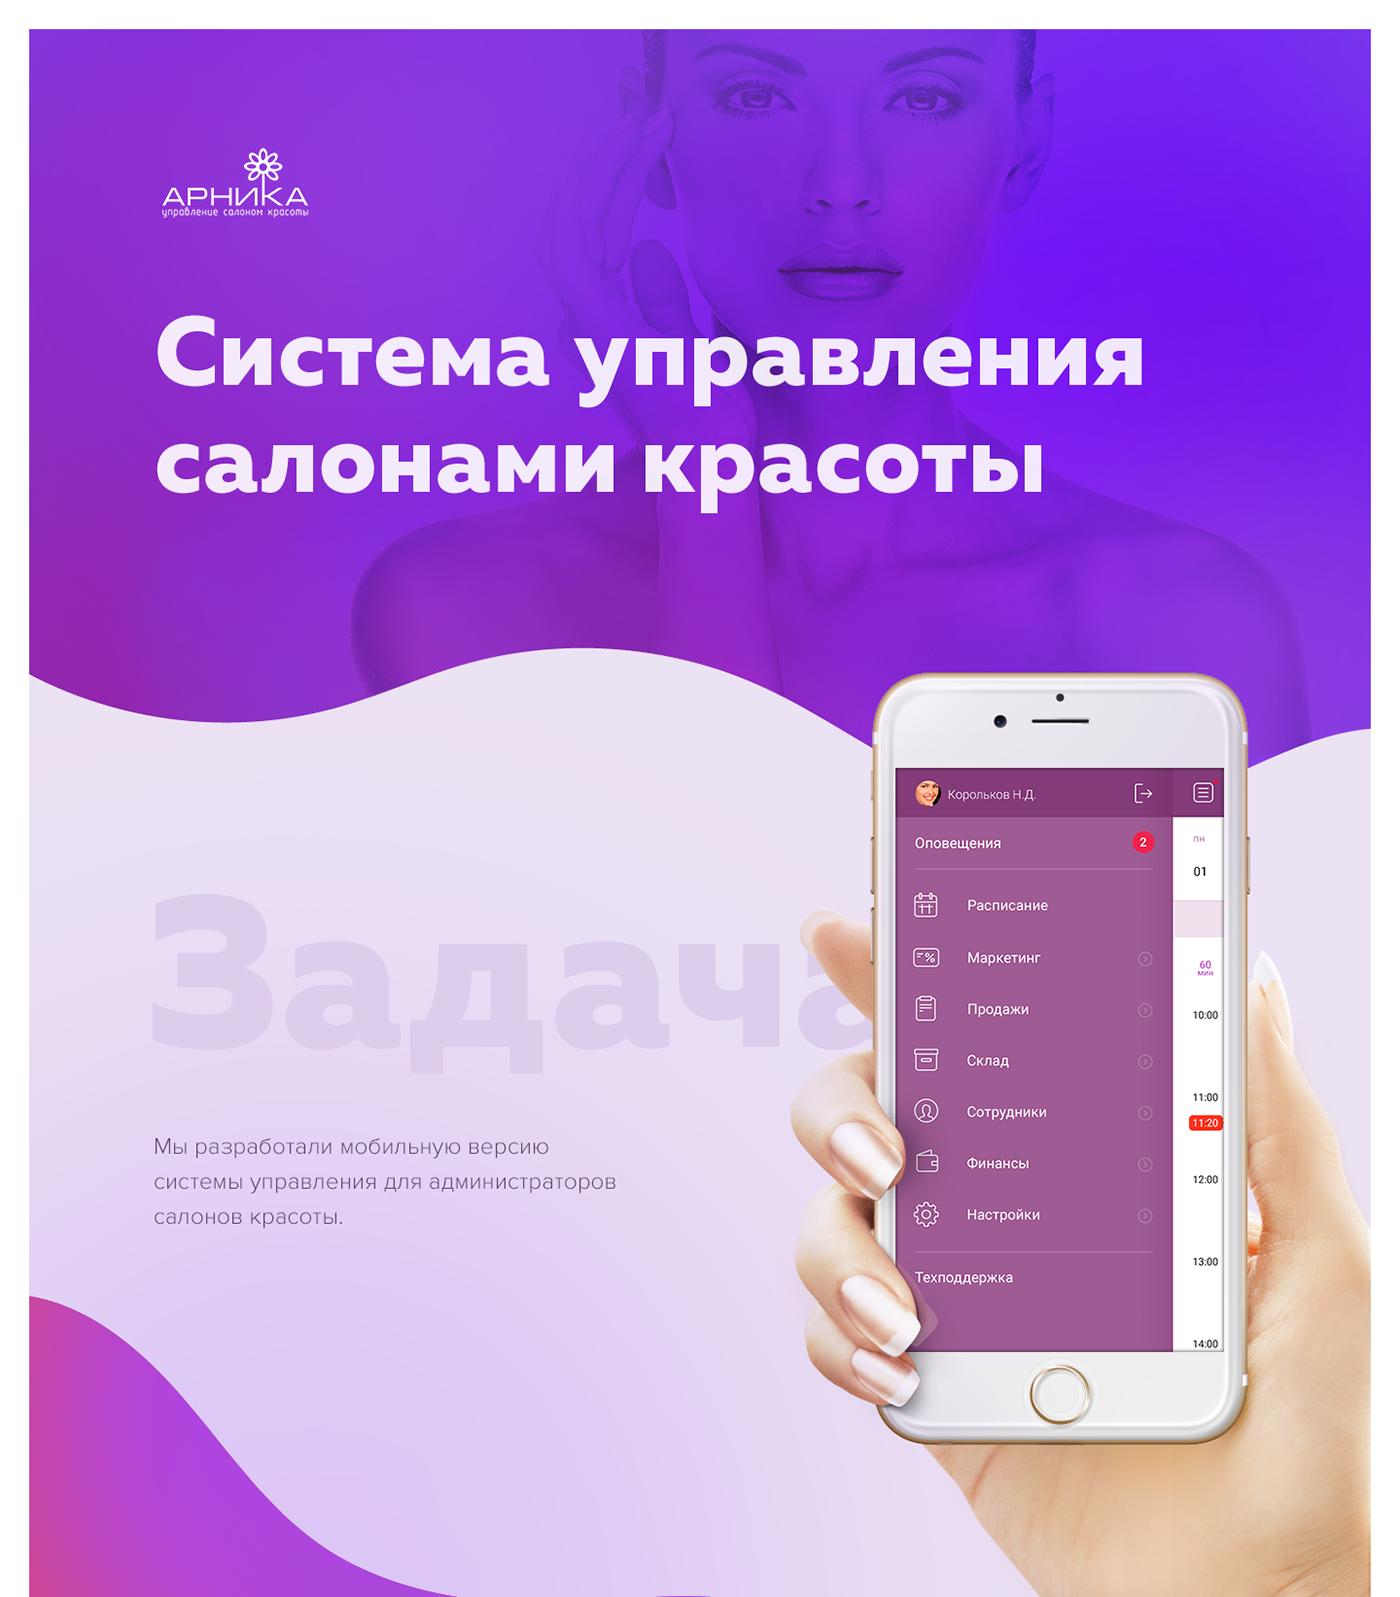 UI ux design system Interface jetstyle beauty shop girl manager